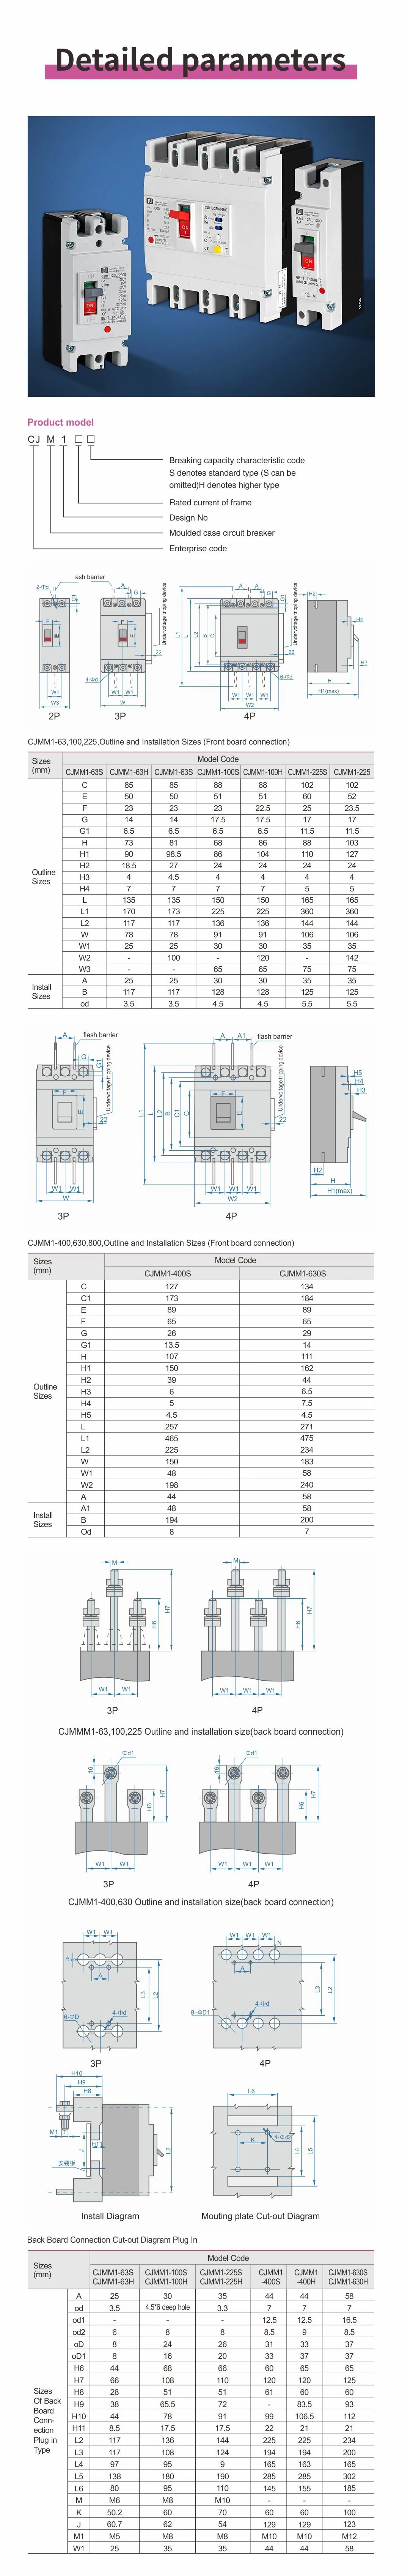 Cjm1 Mould Case Circuit Breaker Customized 125A with High Breaking Capacity MCCB